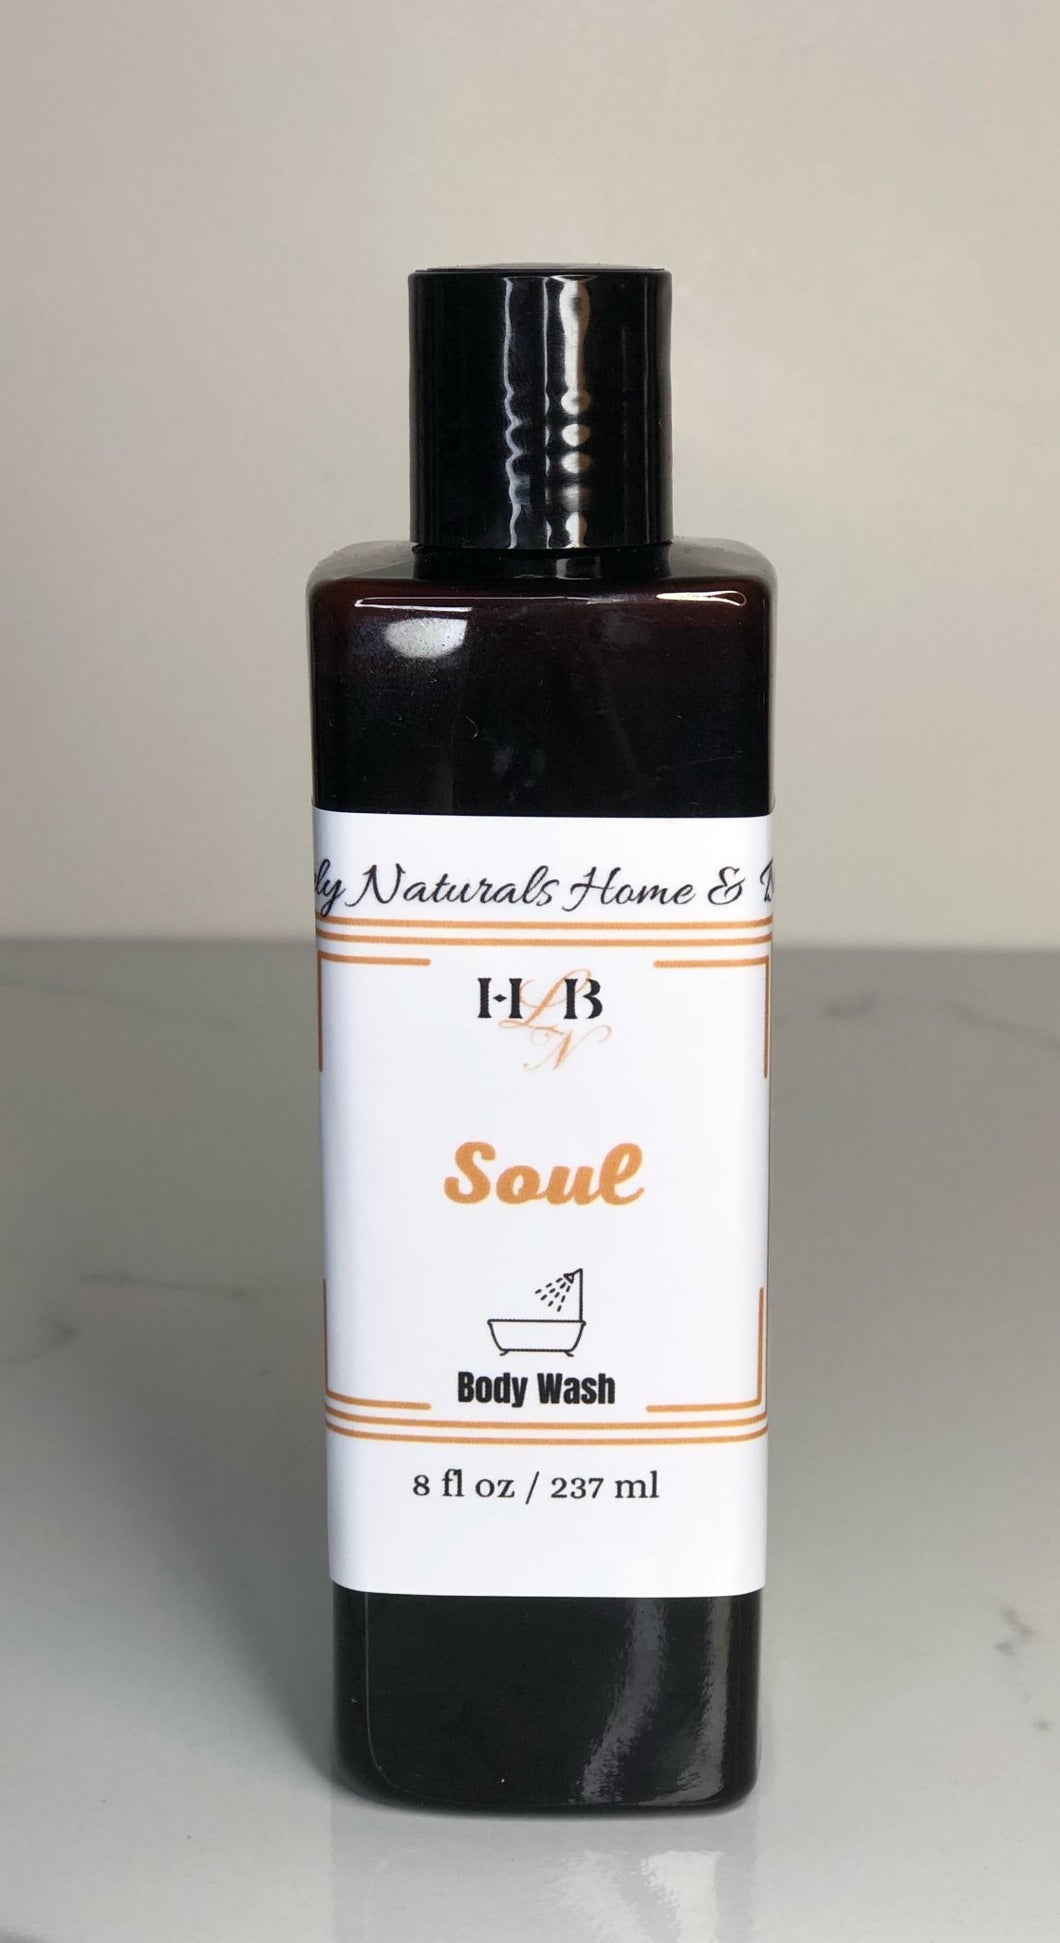 Soul - Lovely Naturals Home & Body -